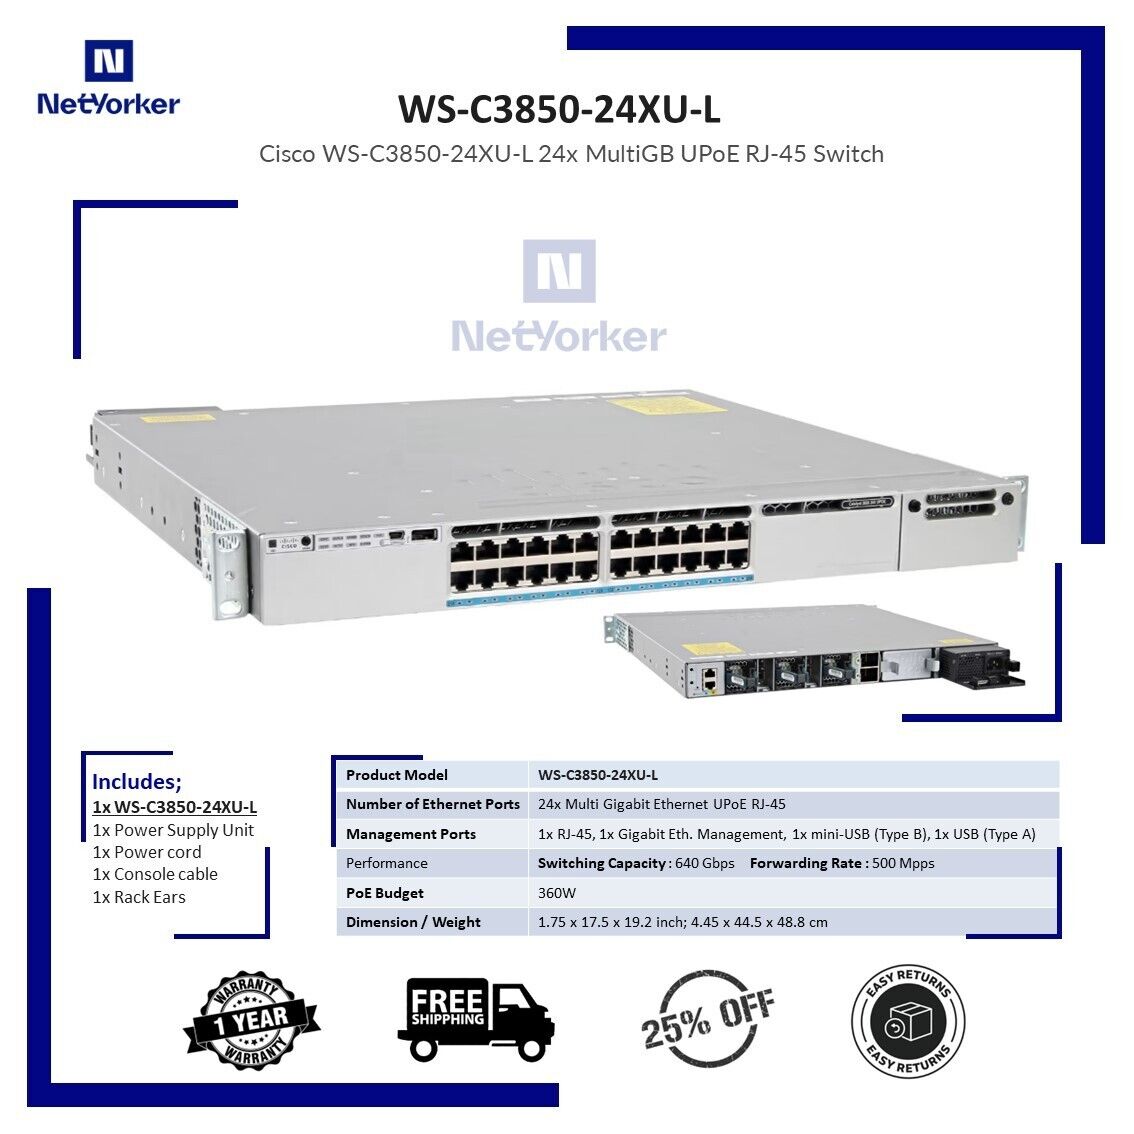 Cisco WS-C3850-24XU-L Catalyst 24 100Mbps/1/2.5/5/10 Gbps UPOE Ethernet Switch